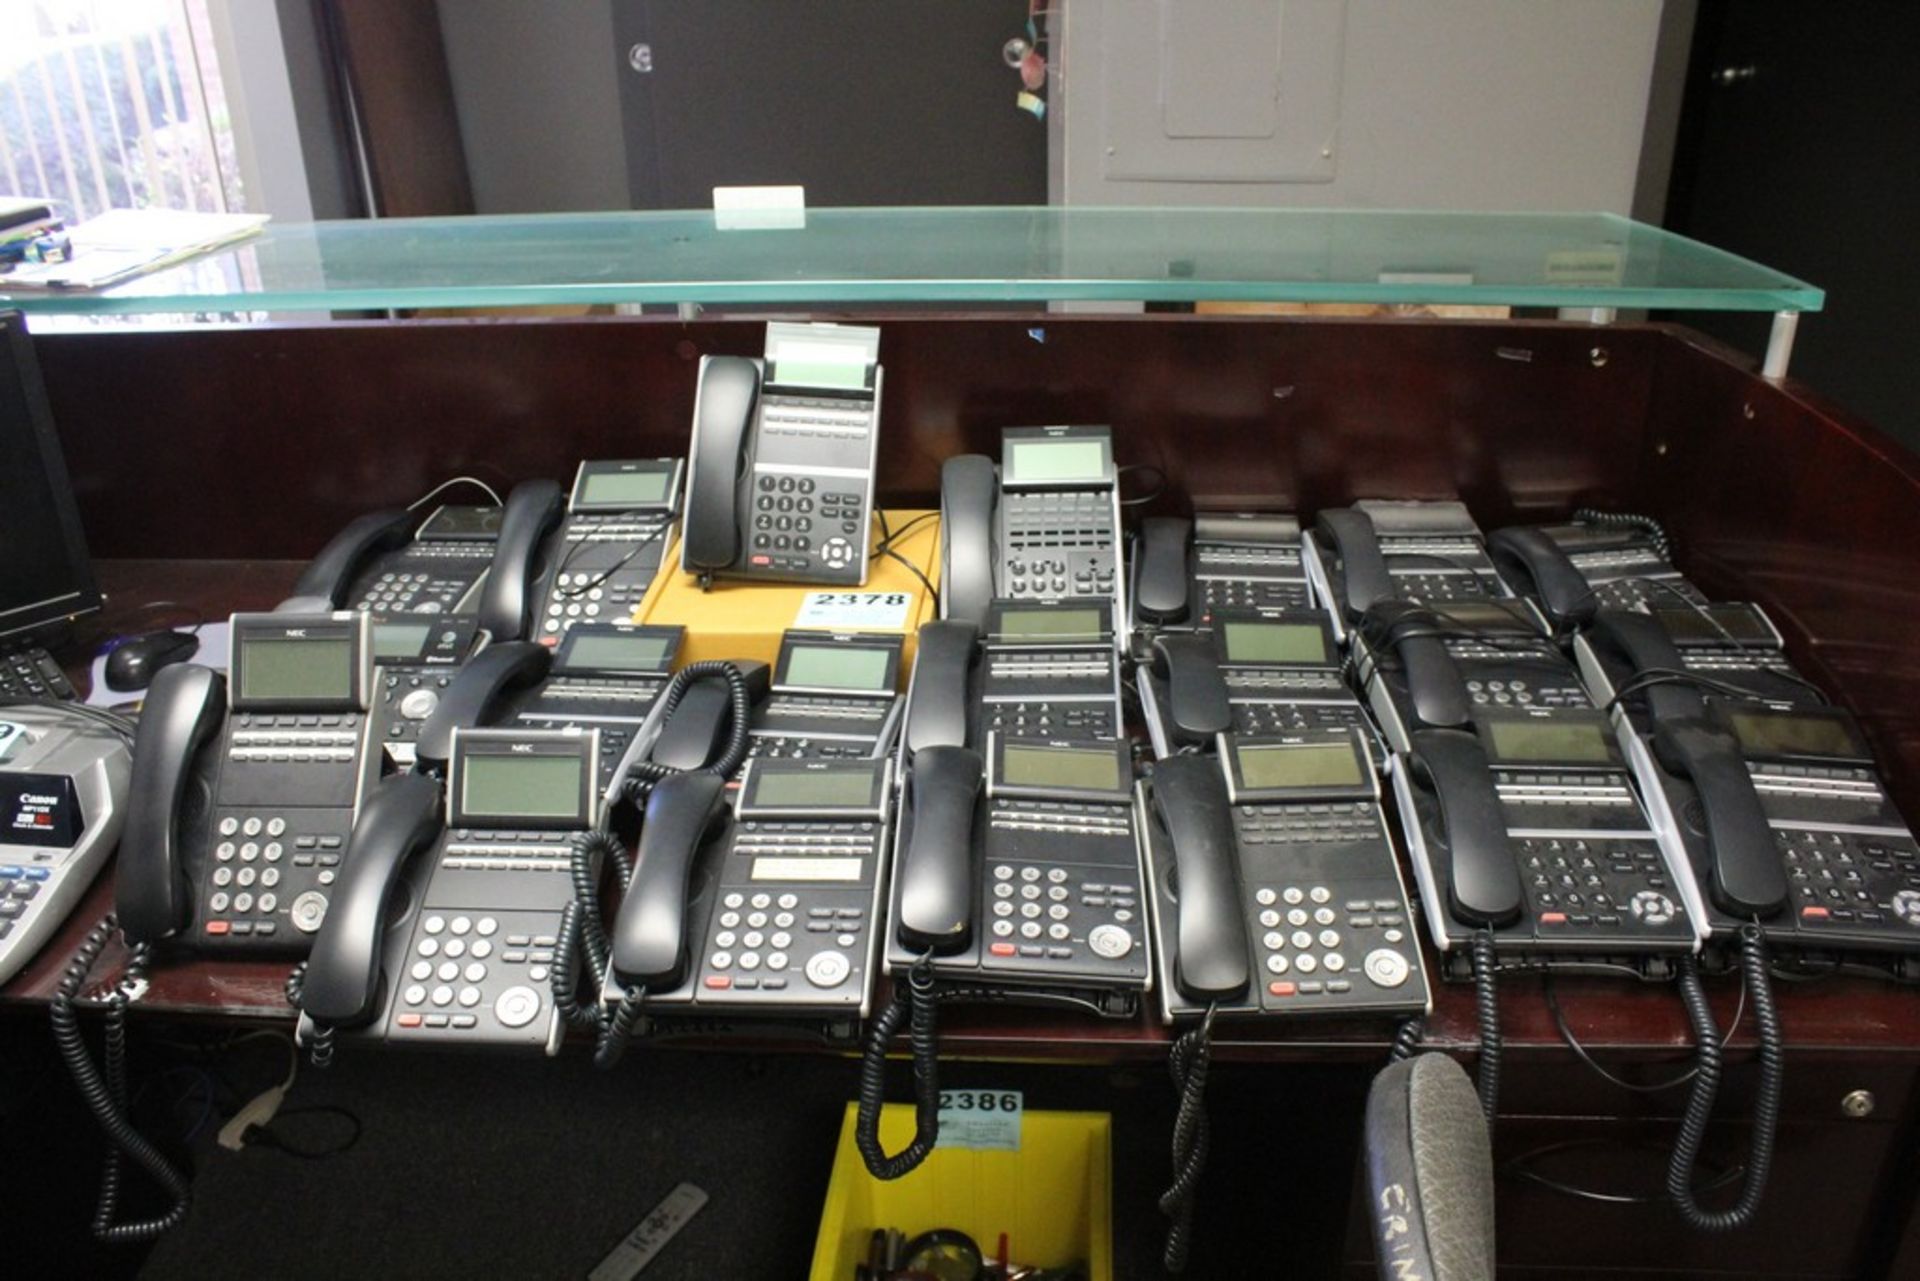 NEC PHONE SYSTEM WITH "ON HOLD" MODULE AND (25) NEC DT700 HANDSETS WITH INFO SCREENS